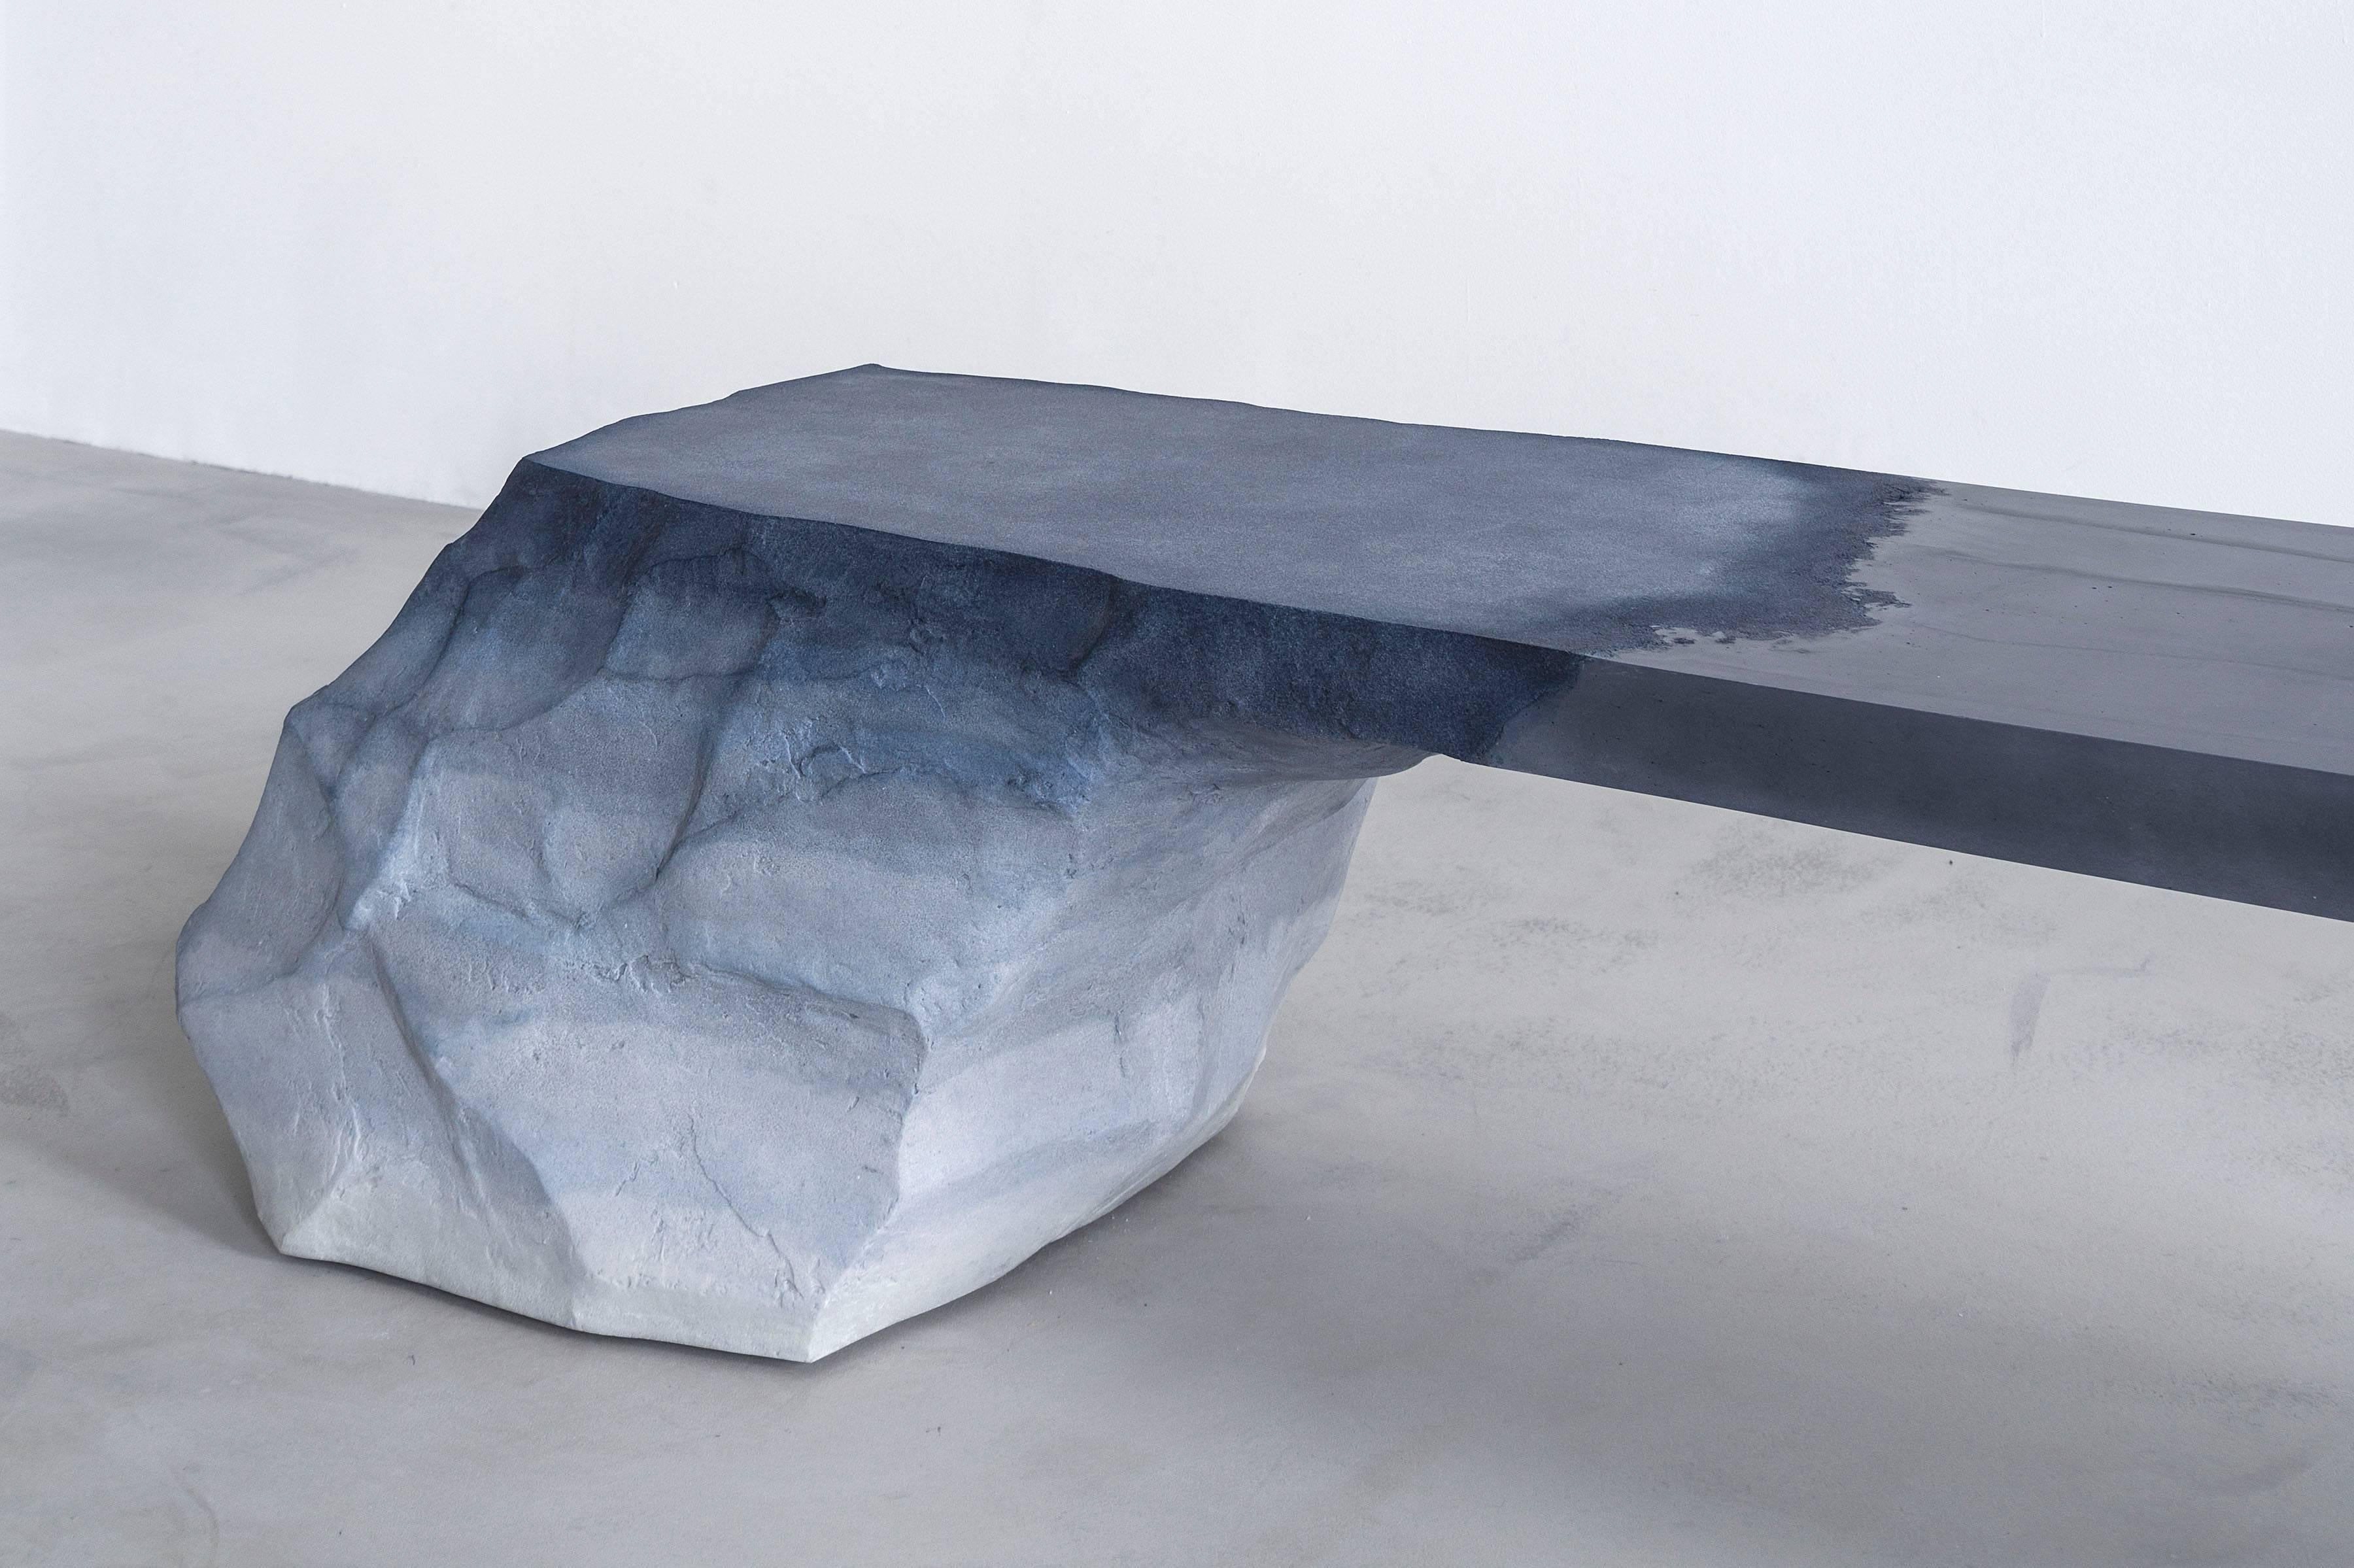 Drift (Bench), 2016
Sand and cement
72” x 18” x 16”
Edition of 3
From the solo exhibition at THE NEW (gallery).

About Fernando Mastrangelo (designer)
Founder of FM/s, artist and designer Fernando Mastrangelo highlights contradicting polarities in